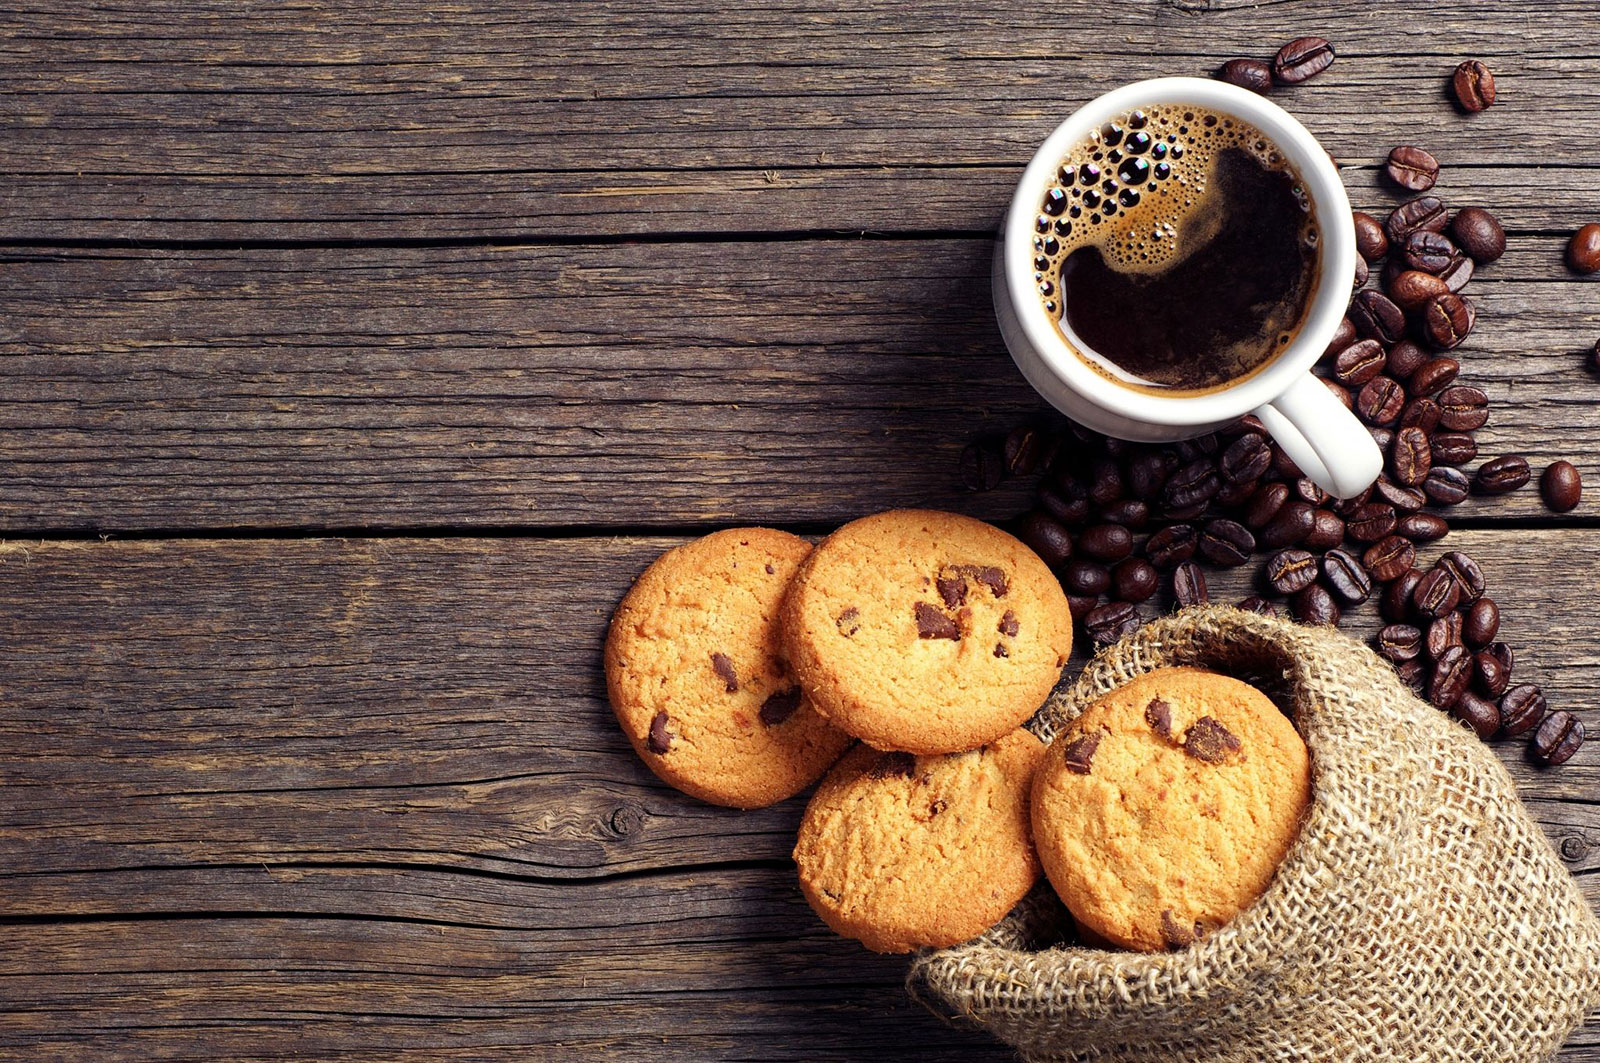 Which Night Animal Are You? Coffee and Cookies